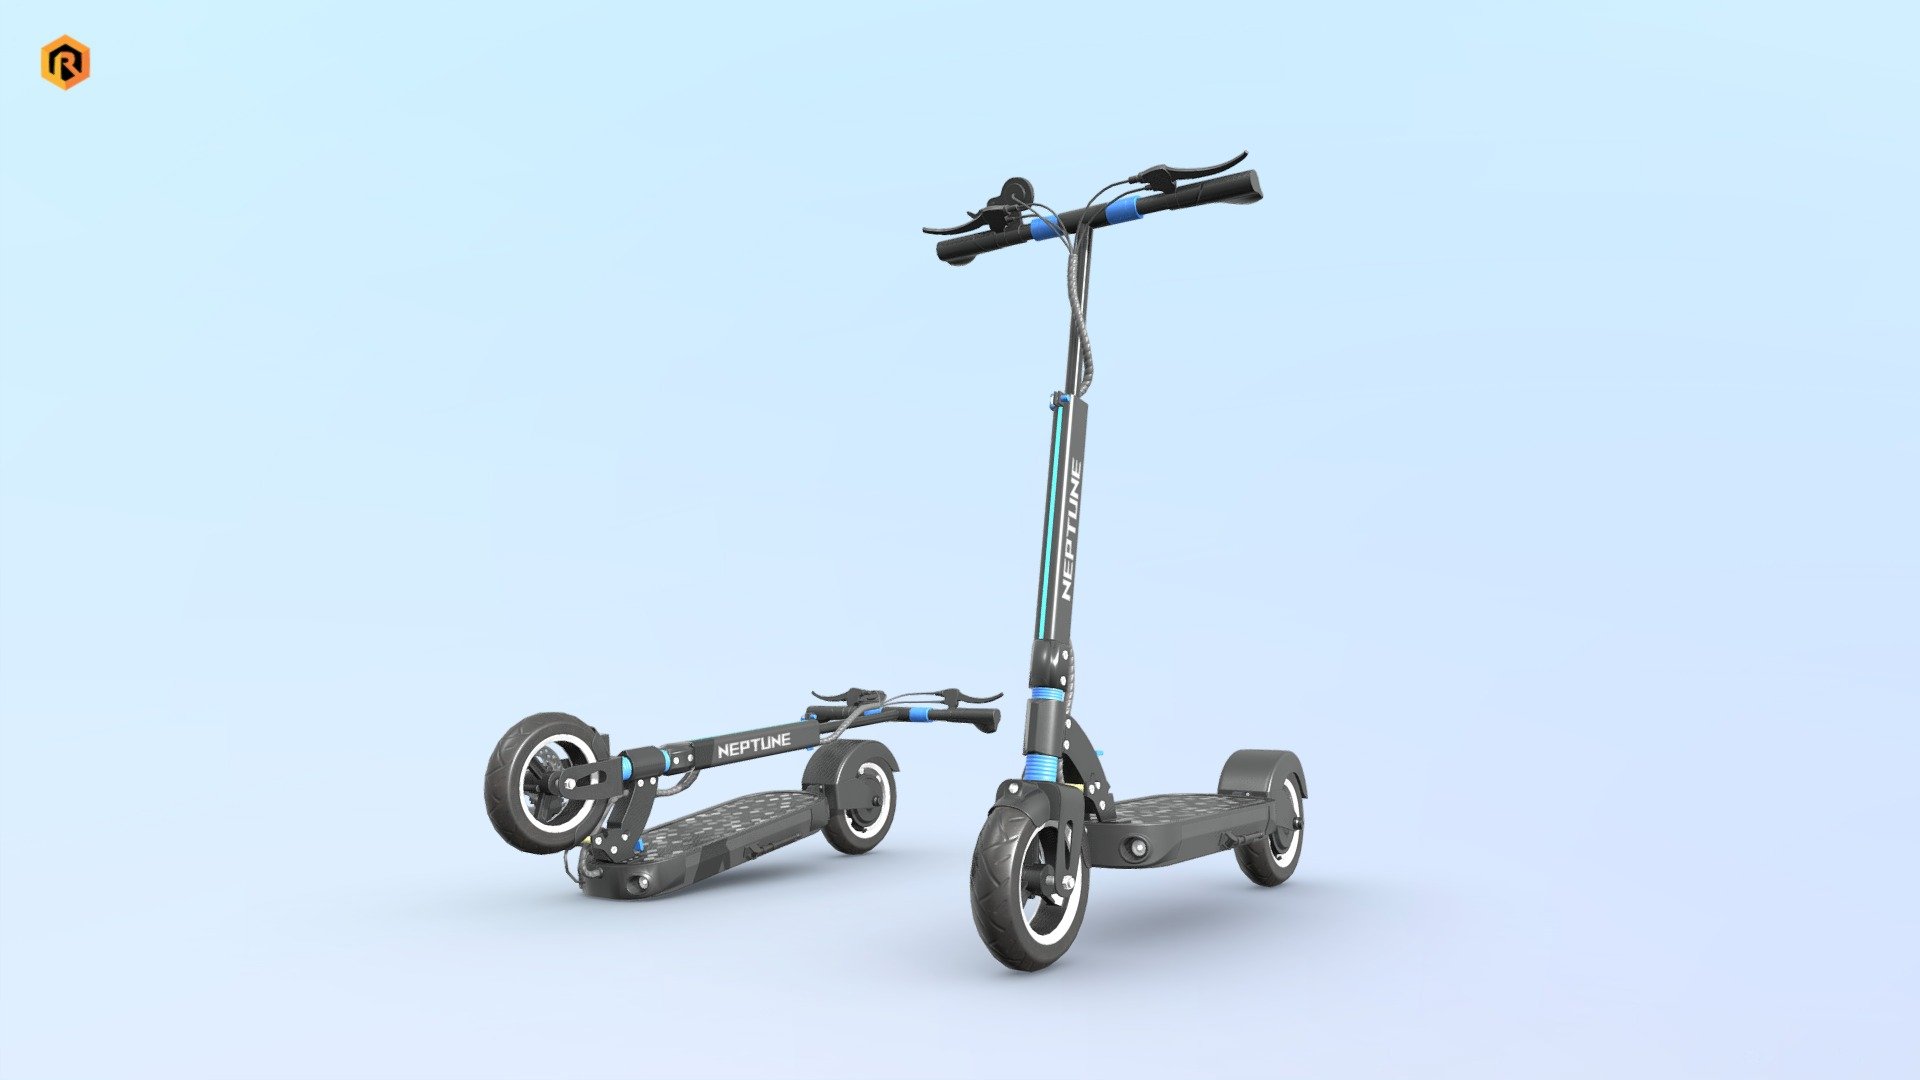 Low-poly PBR 3D model of Electric Scooter.  The model is divided into several parts in order to allow rigging and interfacing to some vehicle control system. There is open and folded version of the scooter in the package.

This asset is best for use in games and other VR / AR, real-time applications such as Unity or Unreal Engine.
It can also be rendered in Blender (ex Cycles) or Vray as the model is equipped with all required PBR textures.  

Technical details:




3 PBR textures sets (Main Body, Emission and Alpha)

16140 Triangles.

16007  Vertices.

The model is divided into several objects to make it easier to configure different variants of the vehicle.

Lot of additional file formats included (Blender, Unity, UE4, Maya etc.)  

More file formats are available in additional zip file on product page.

Please feel free to contact me if you have any questions or need any support for this asset.

Support e-mail: support@rescue3d.com - Electric Scooter - Buy Royalty Free 3D model by Rescue3D Assets (@rescue3d) 3d model